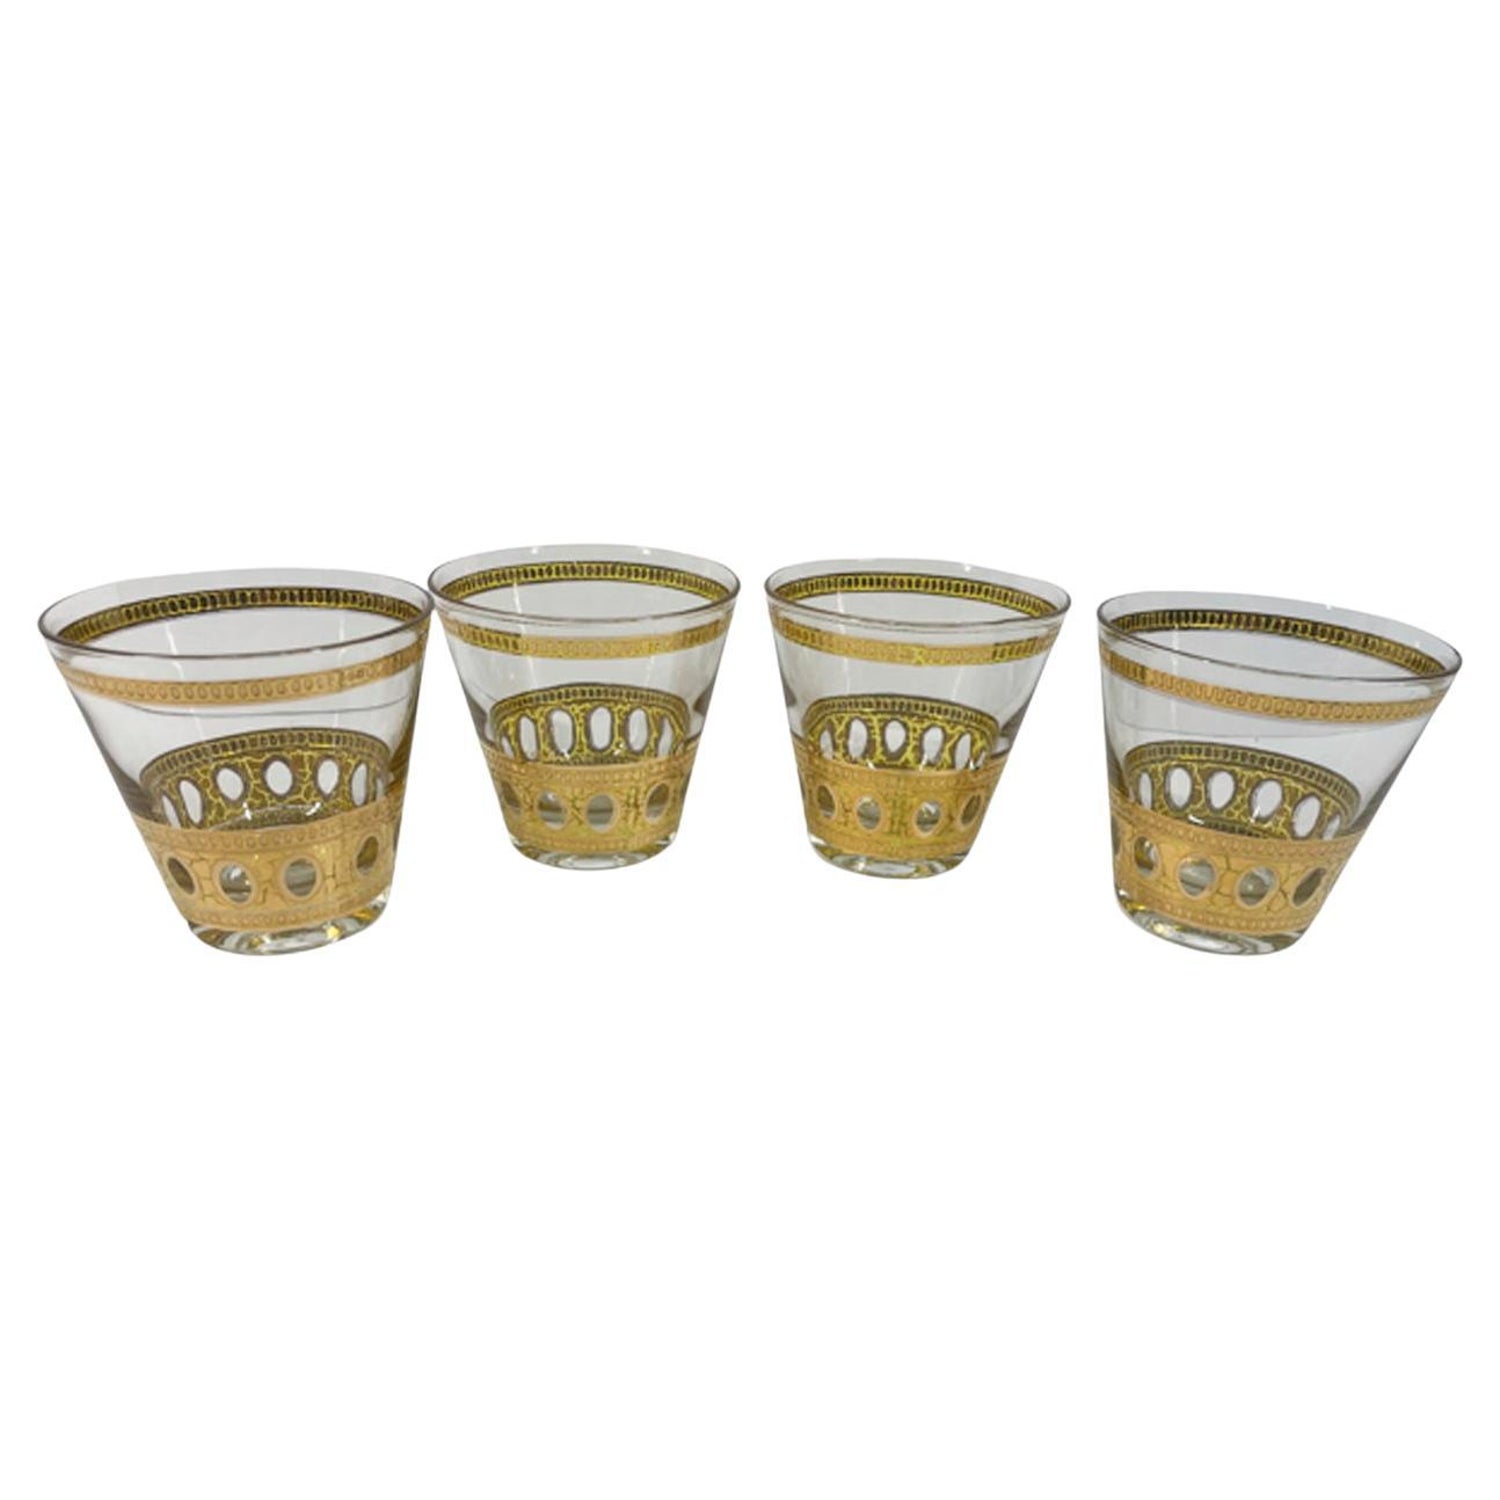 1950's Vintage Culver Ltd Highball Drinking Glasses with 22K Gold Owls Set  of 6 For Sale at 1stDibs